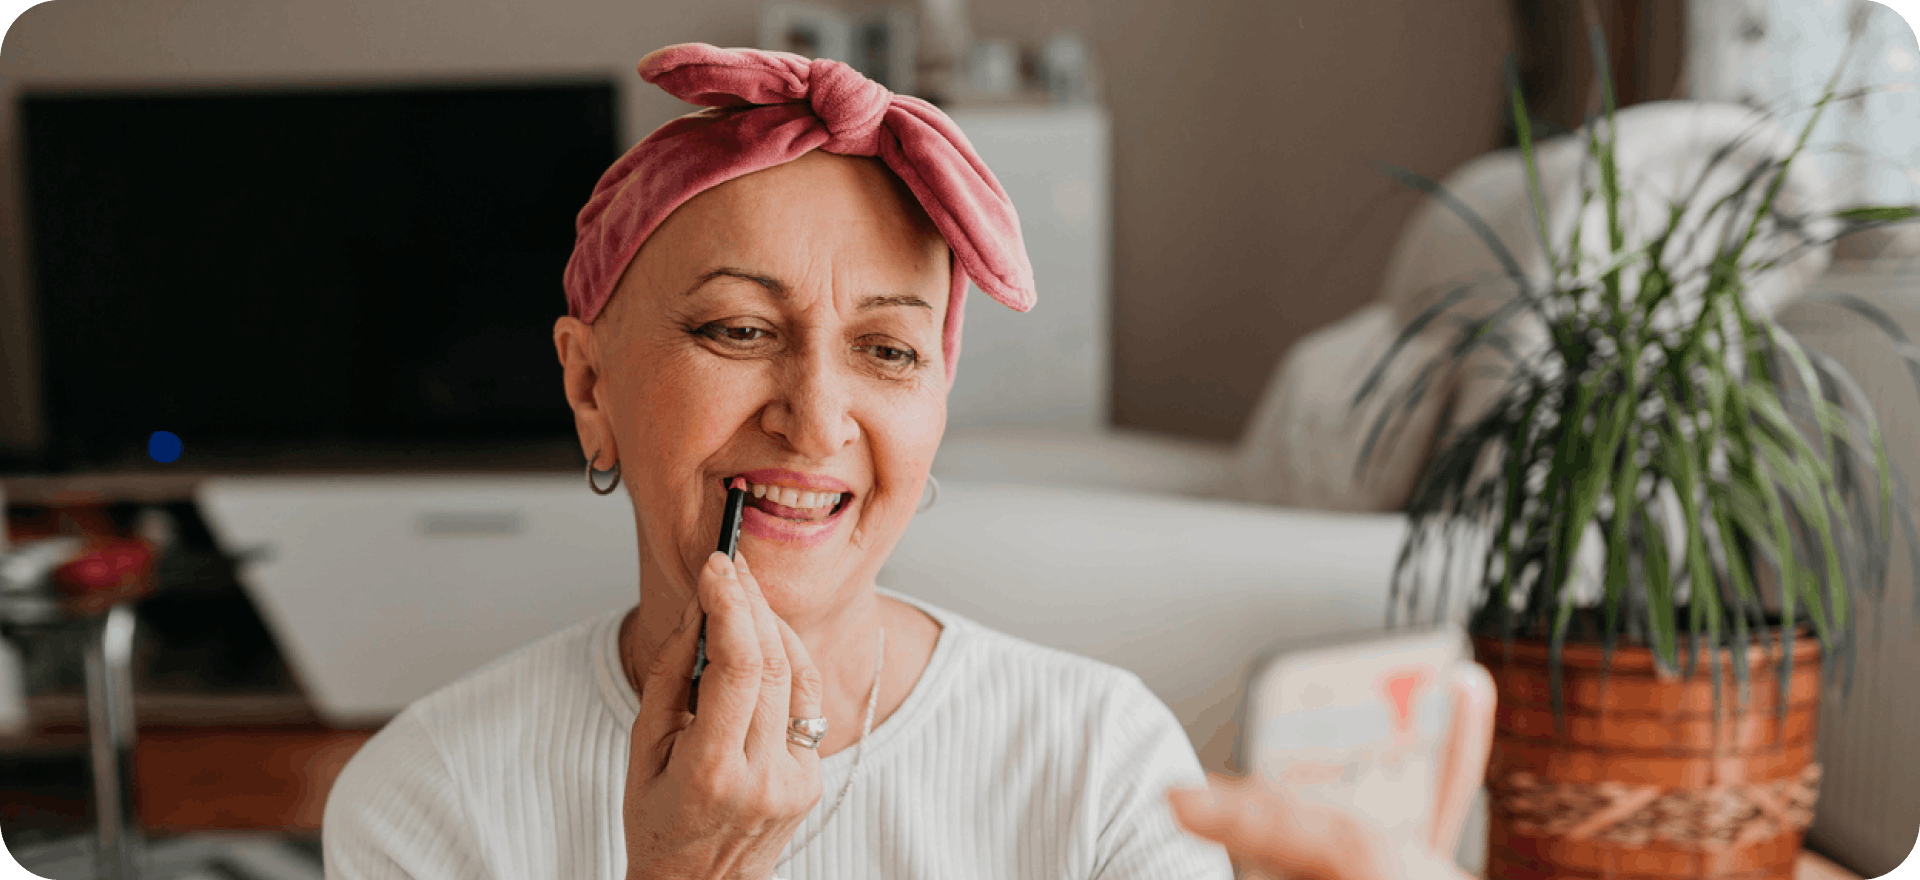 An older woman in a headscarf applies makeup while experiencing the effects of chemo and other cancer treatments on her hair.